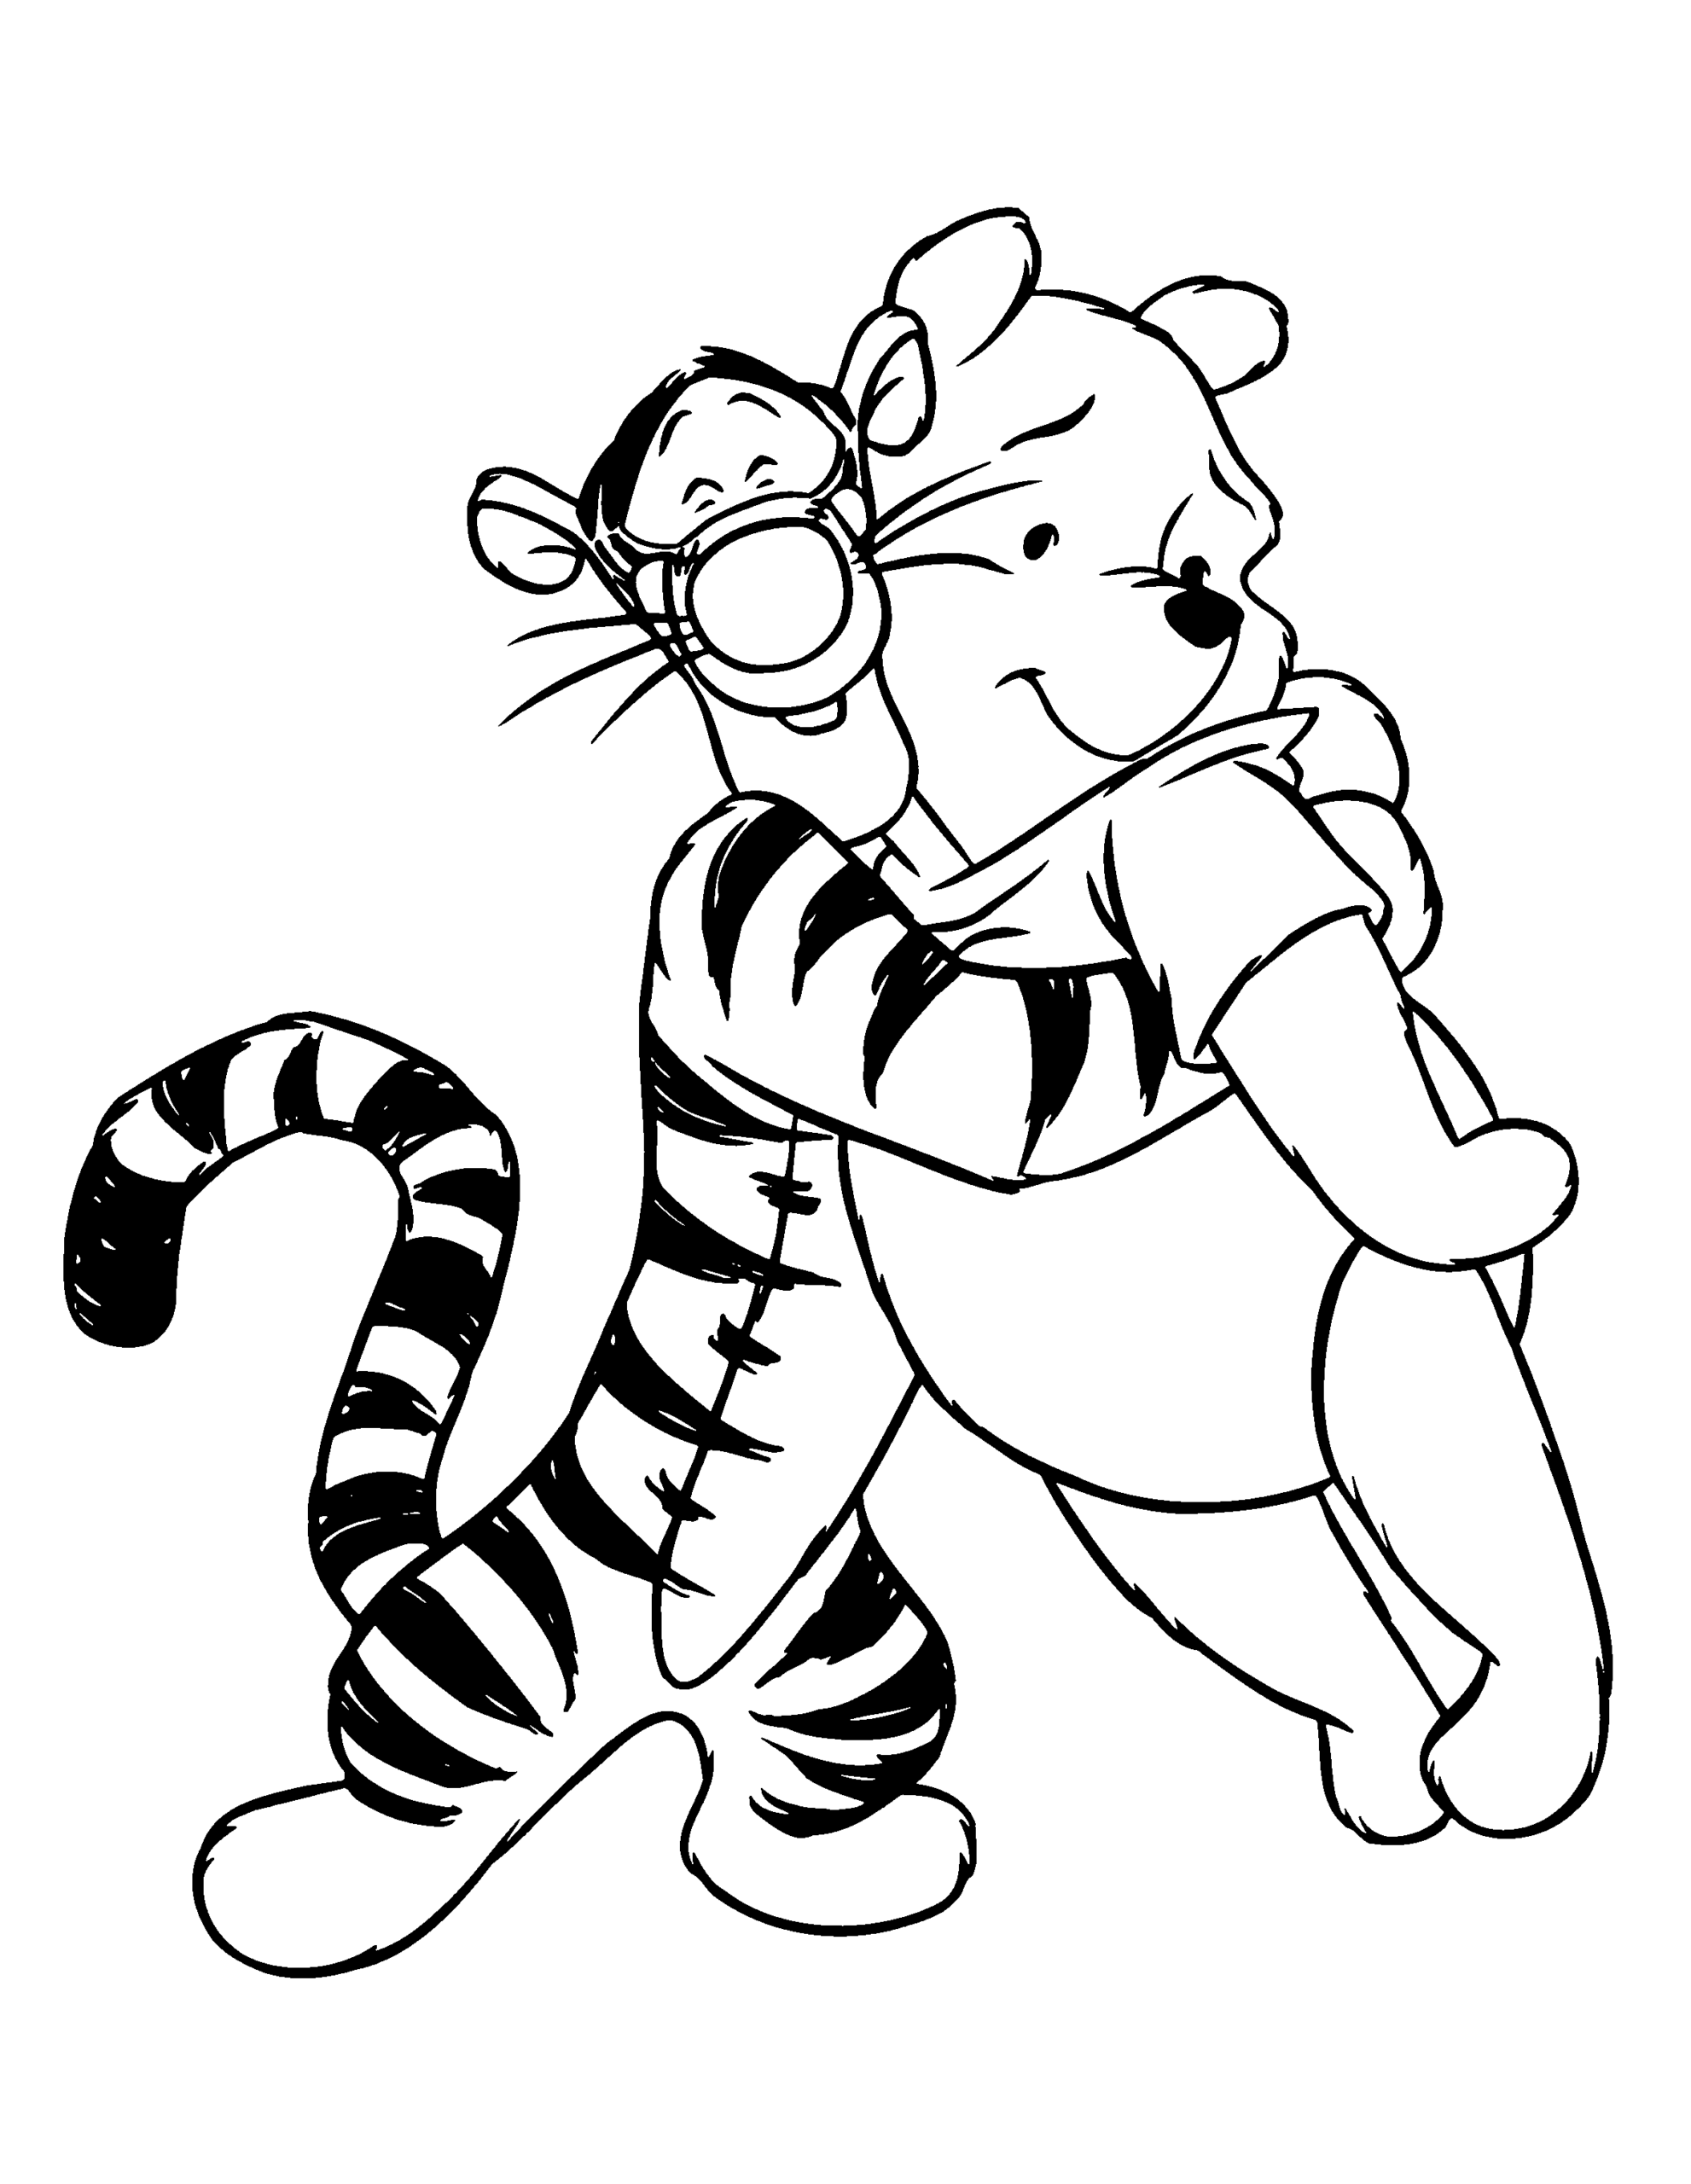 Winnie the Pooh Coloring Pages Cartoons Winnie The Pooh and Tigger Printable 2020 7065 Coloring4free